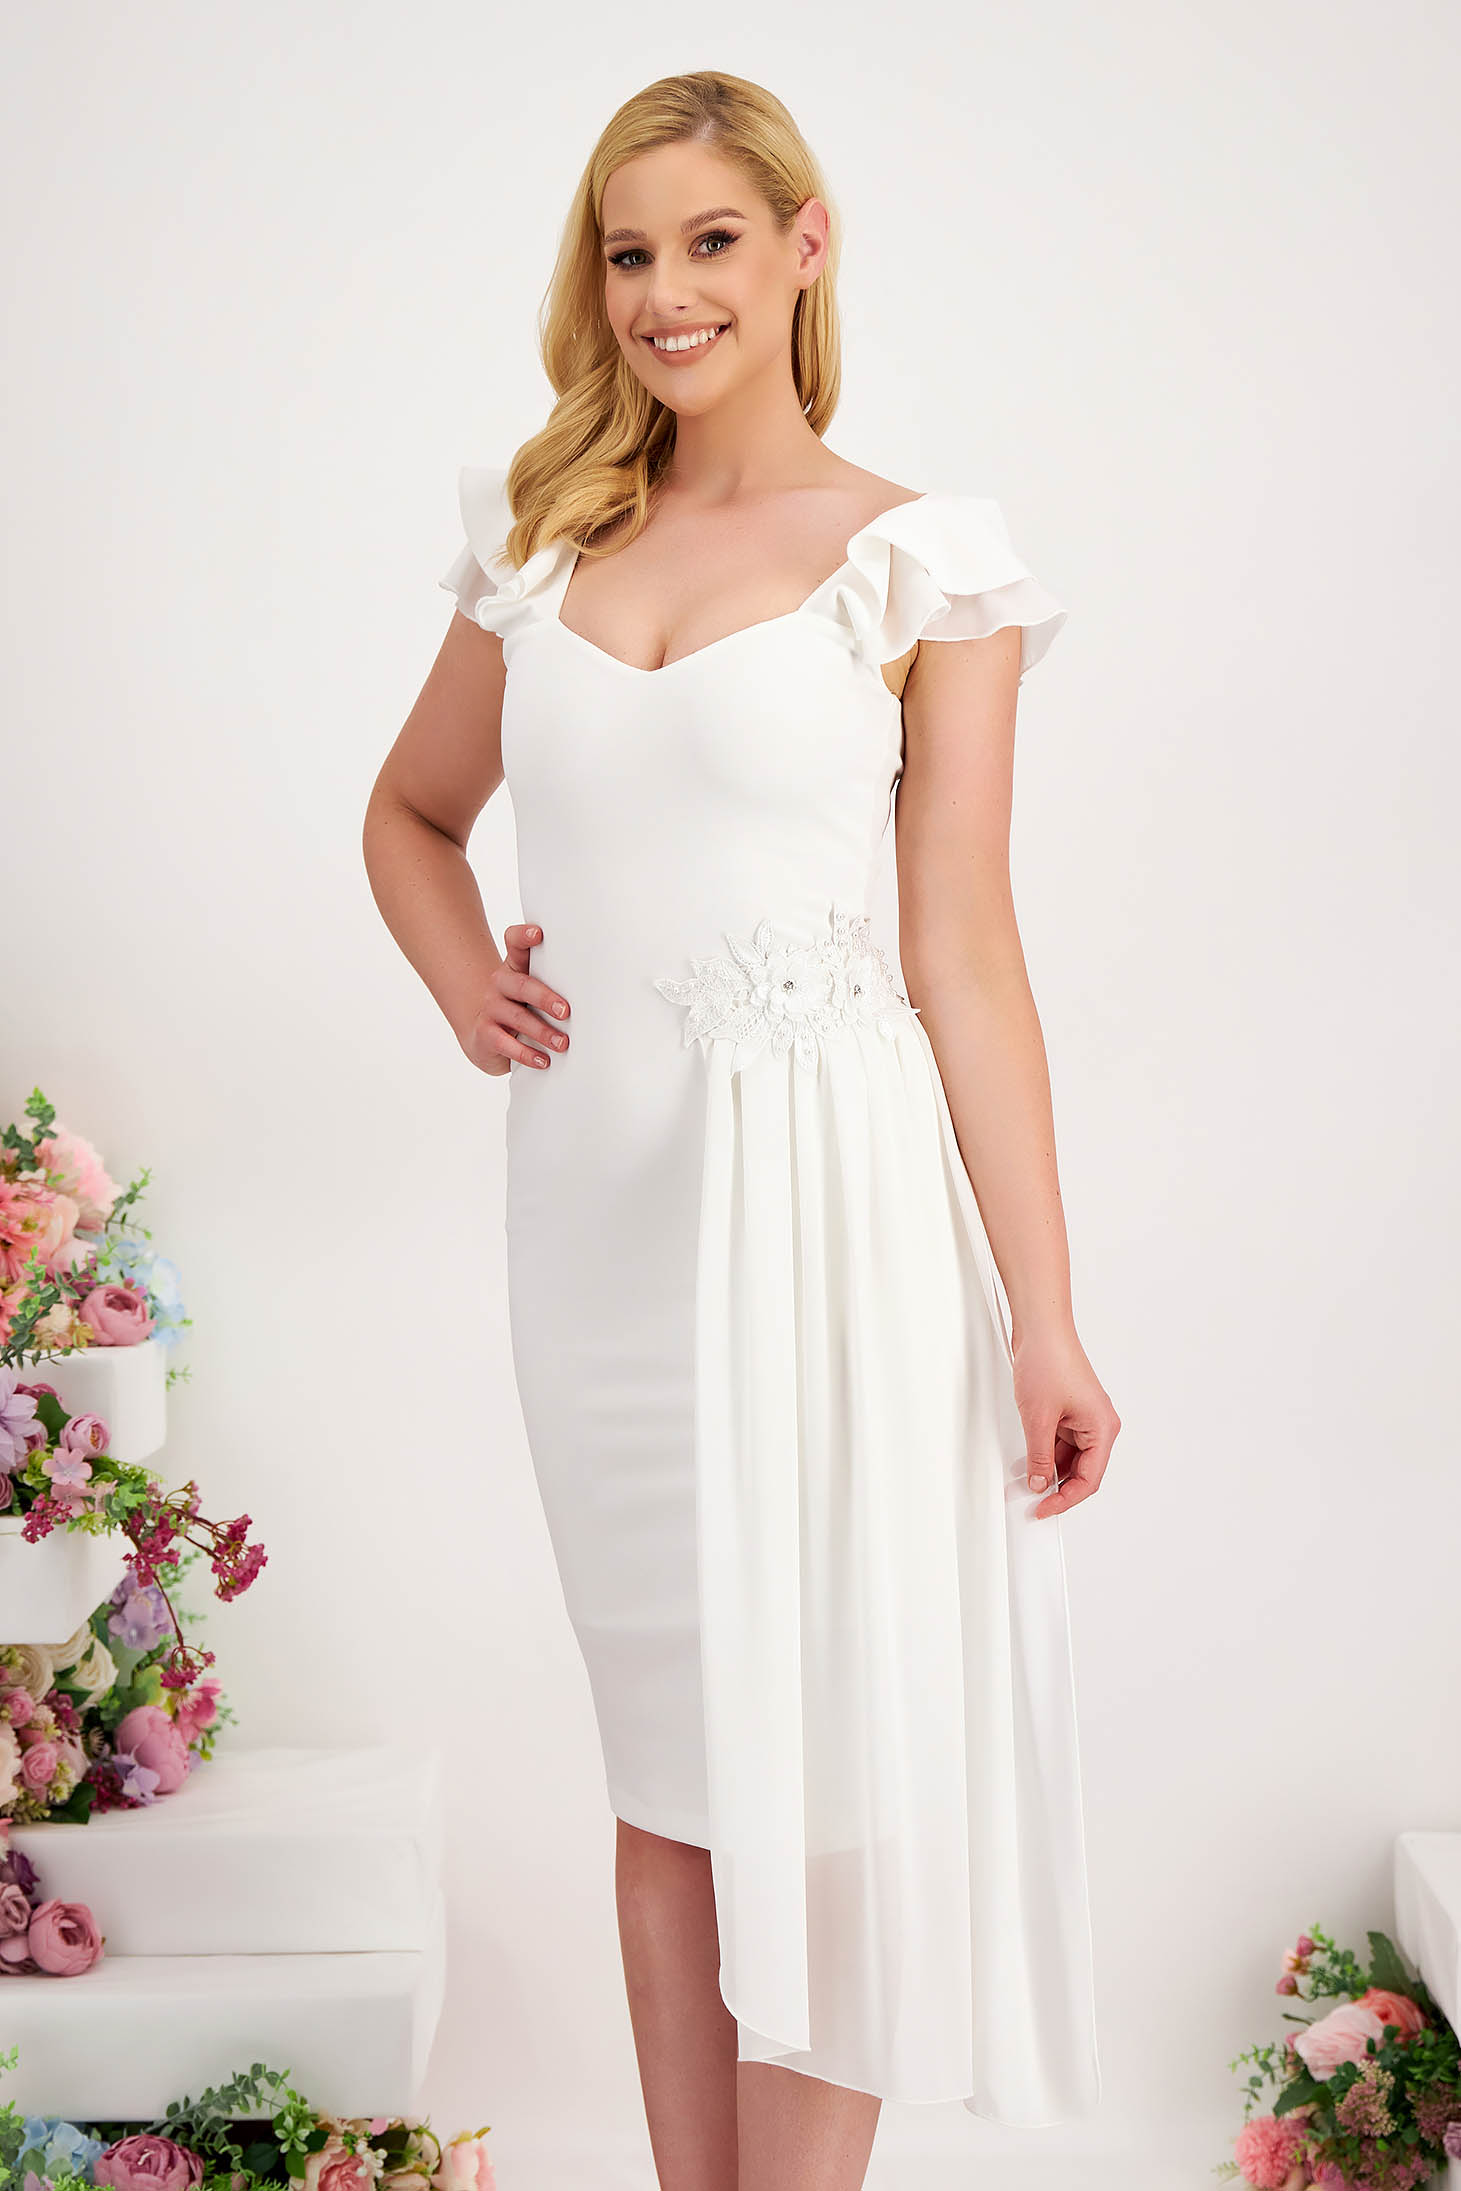 Crep White Pencil Dress with Deep Neckline and Veil Overlay - StarShinerS